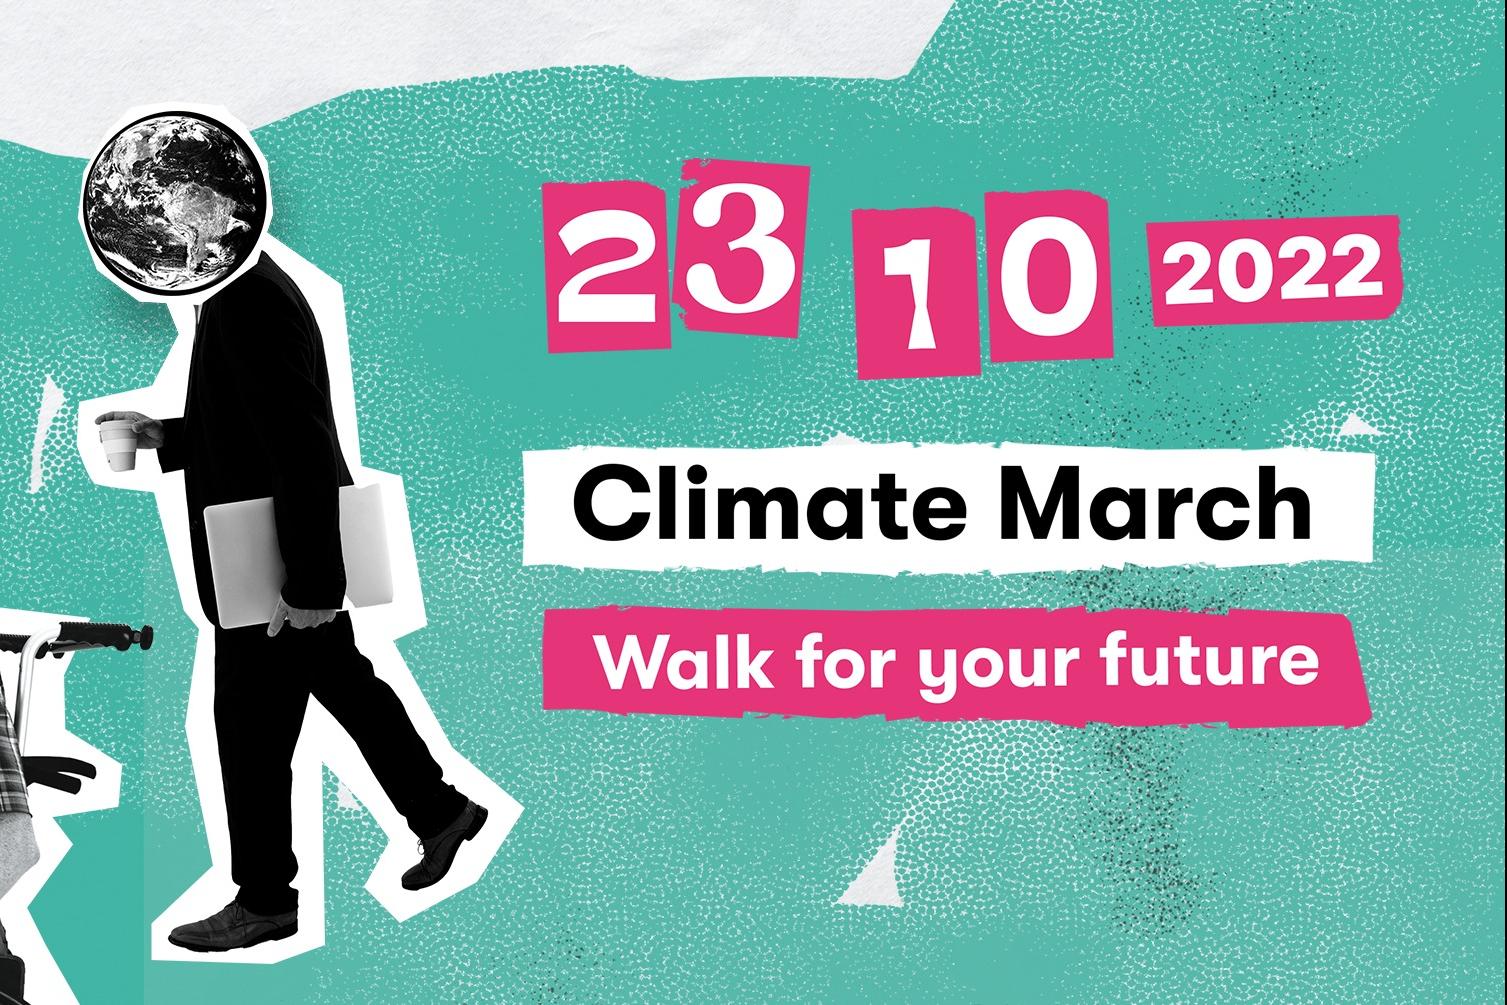 Walk for your future